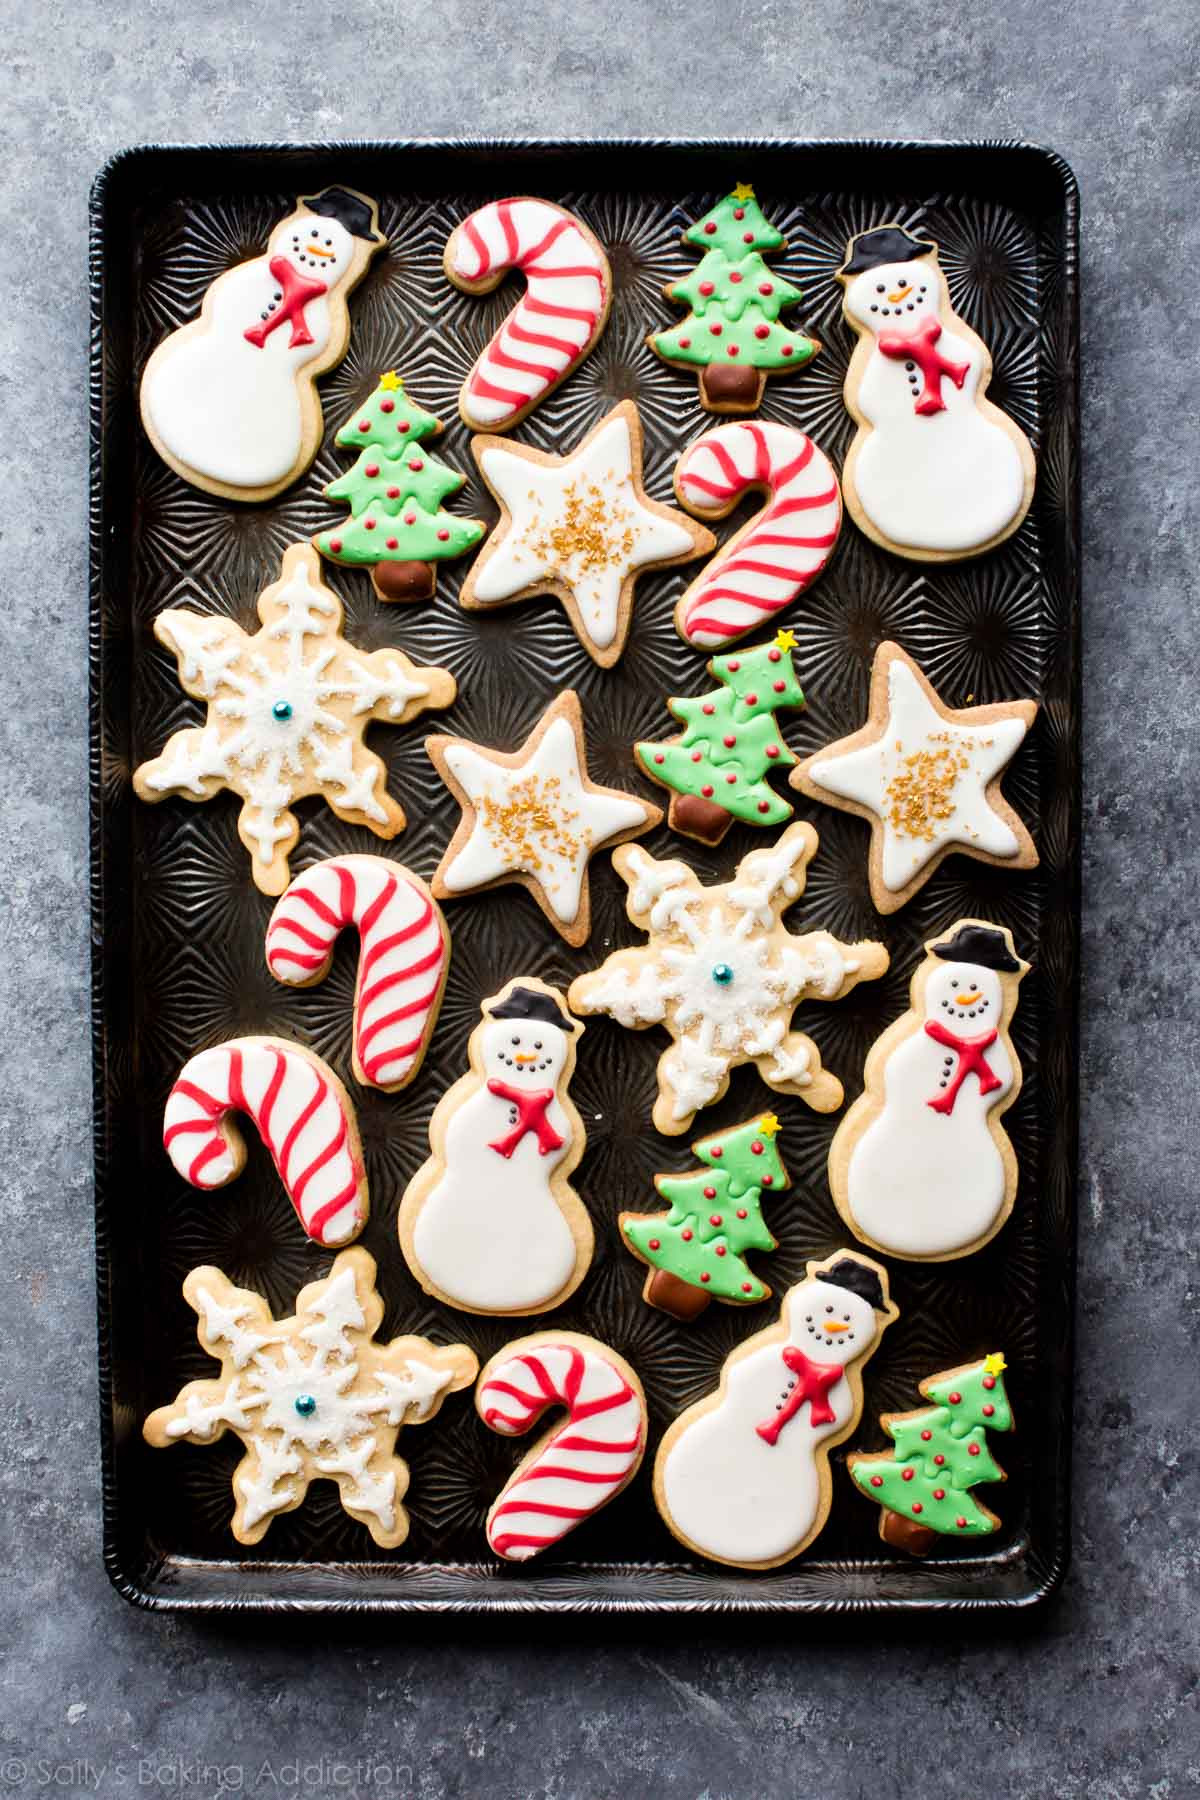 Christmas Themed Cookies
 How to Decorate Sugar Cookies